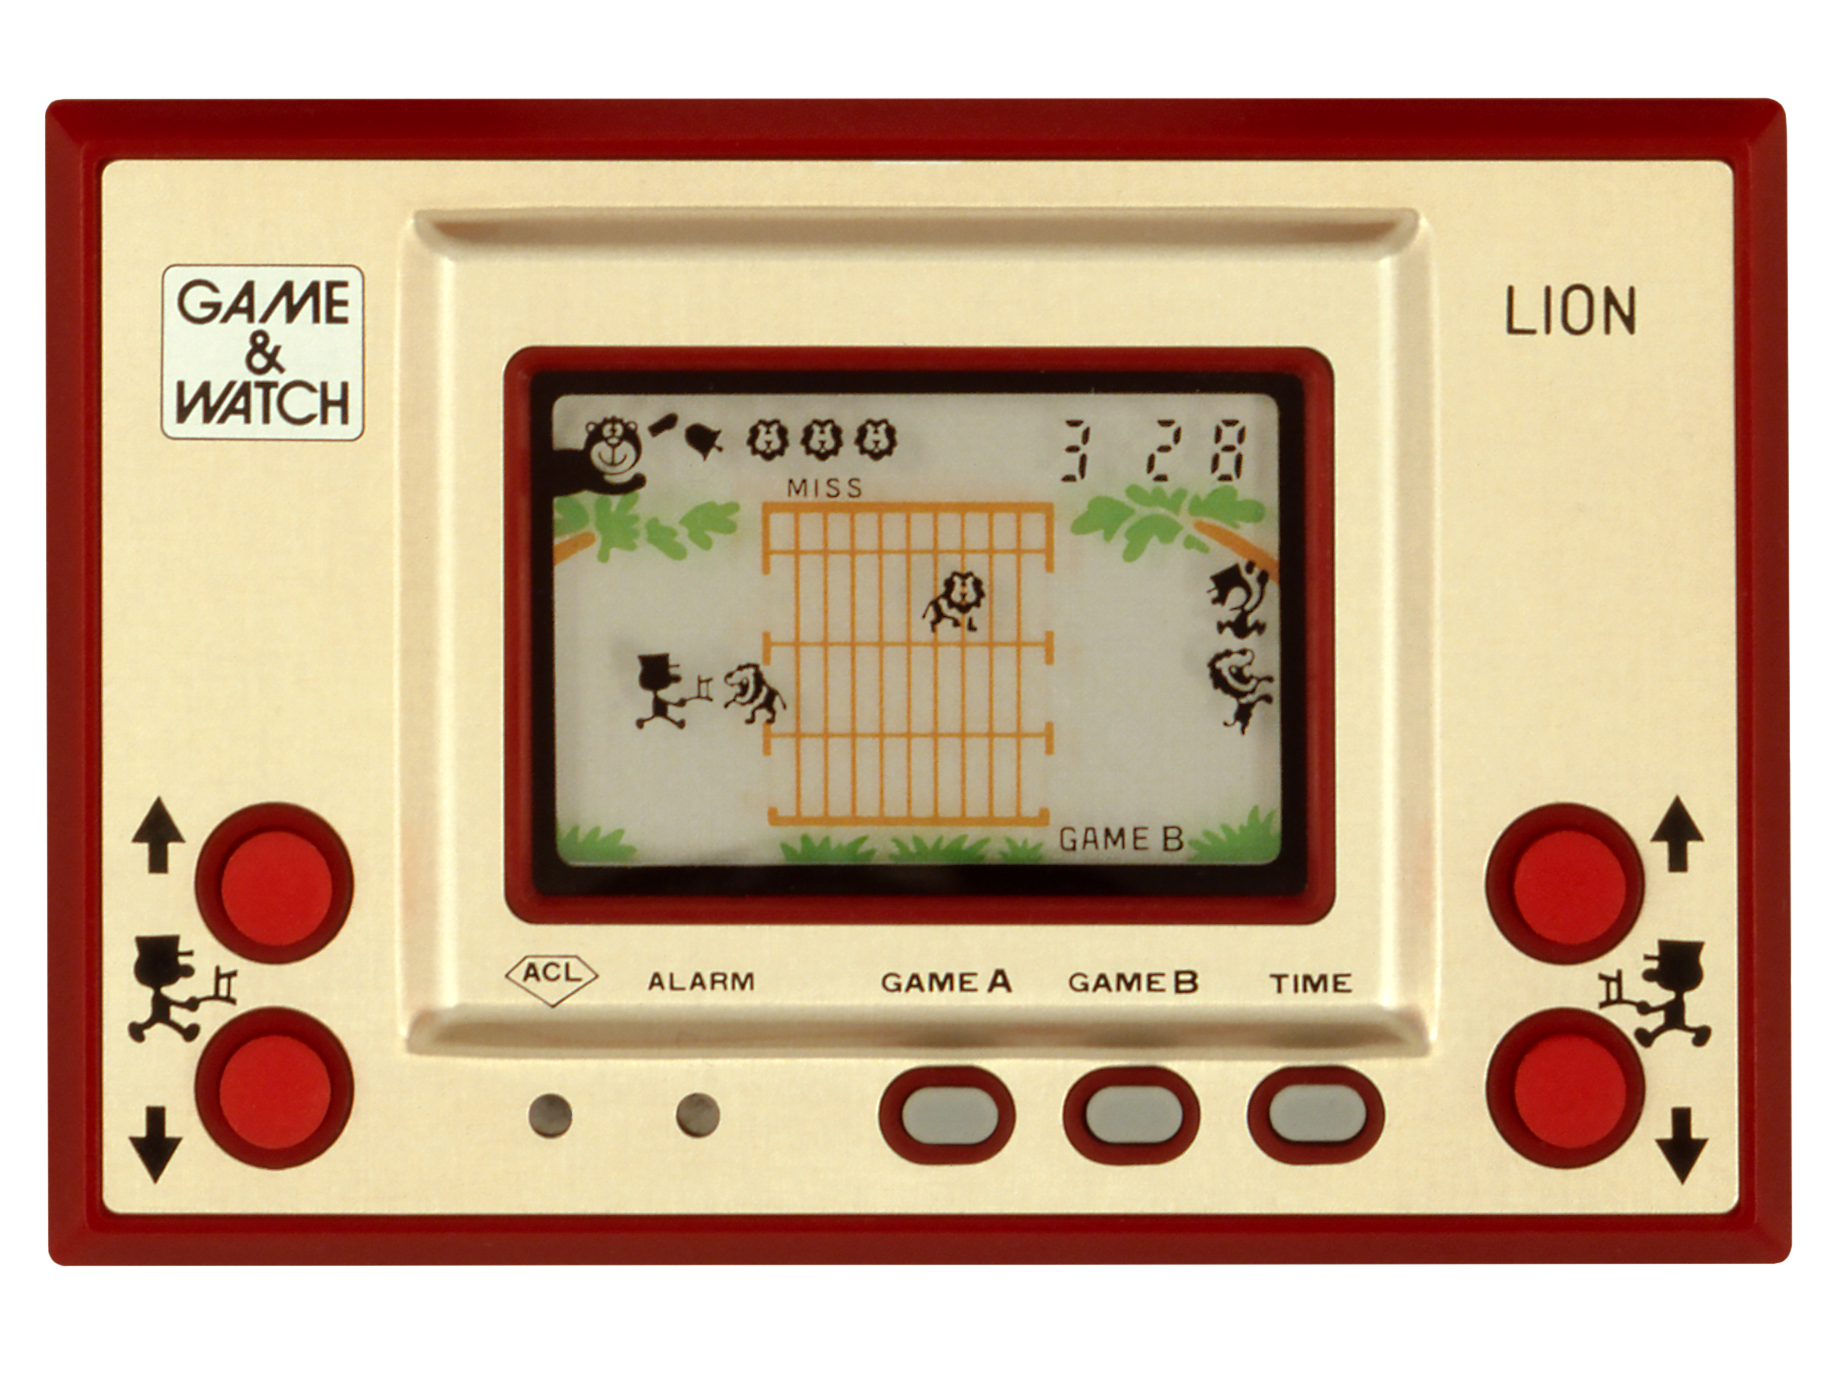 Watch this game. Nintendo game and watch Ball. Nintendo game & watch. Нинтендо гейм и вотч. Game and watch Lion.